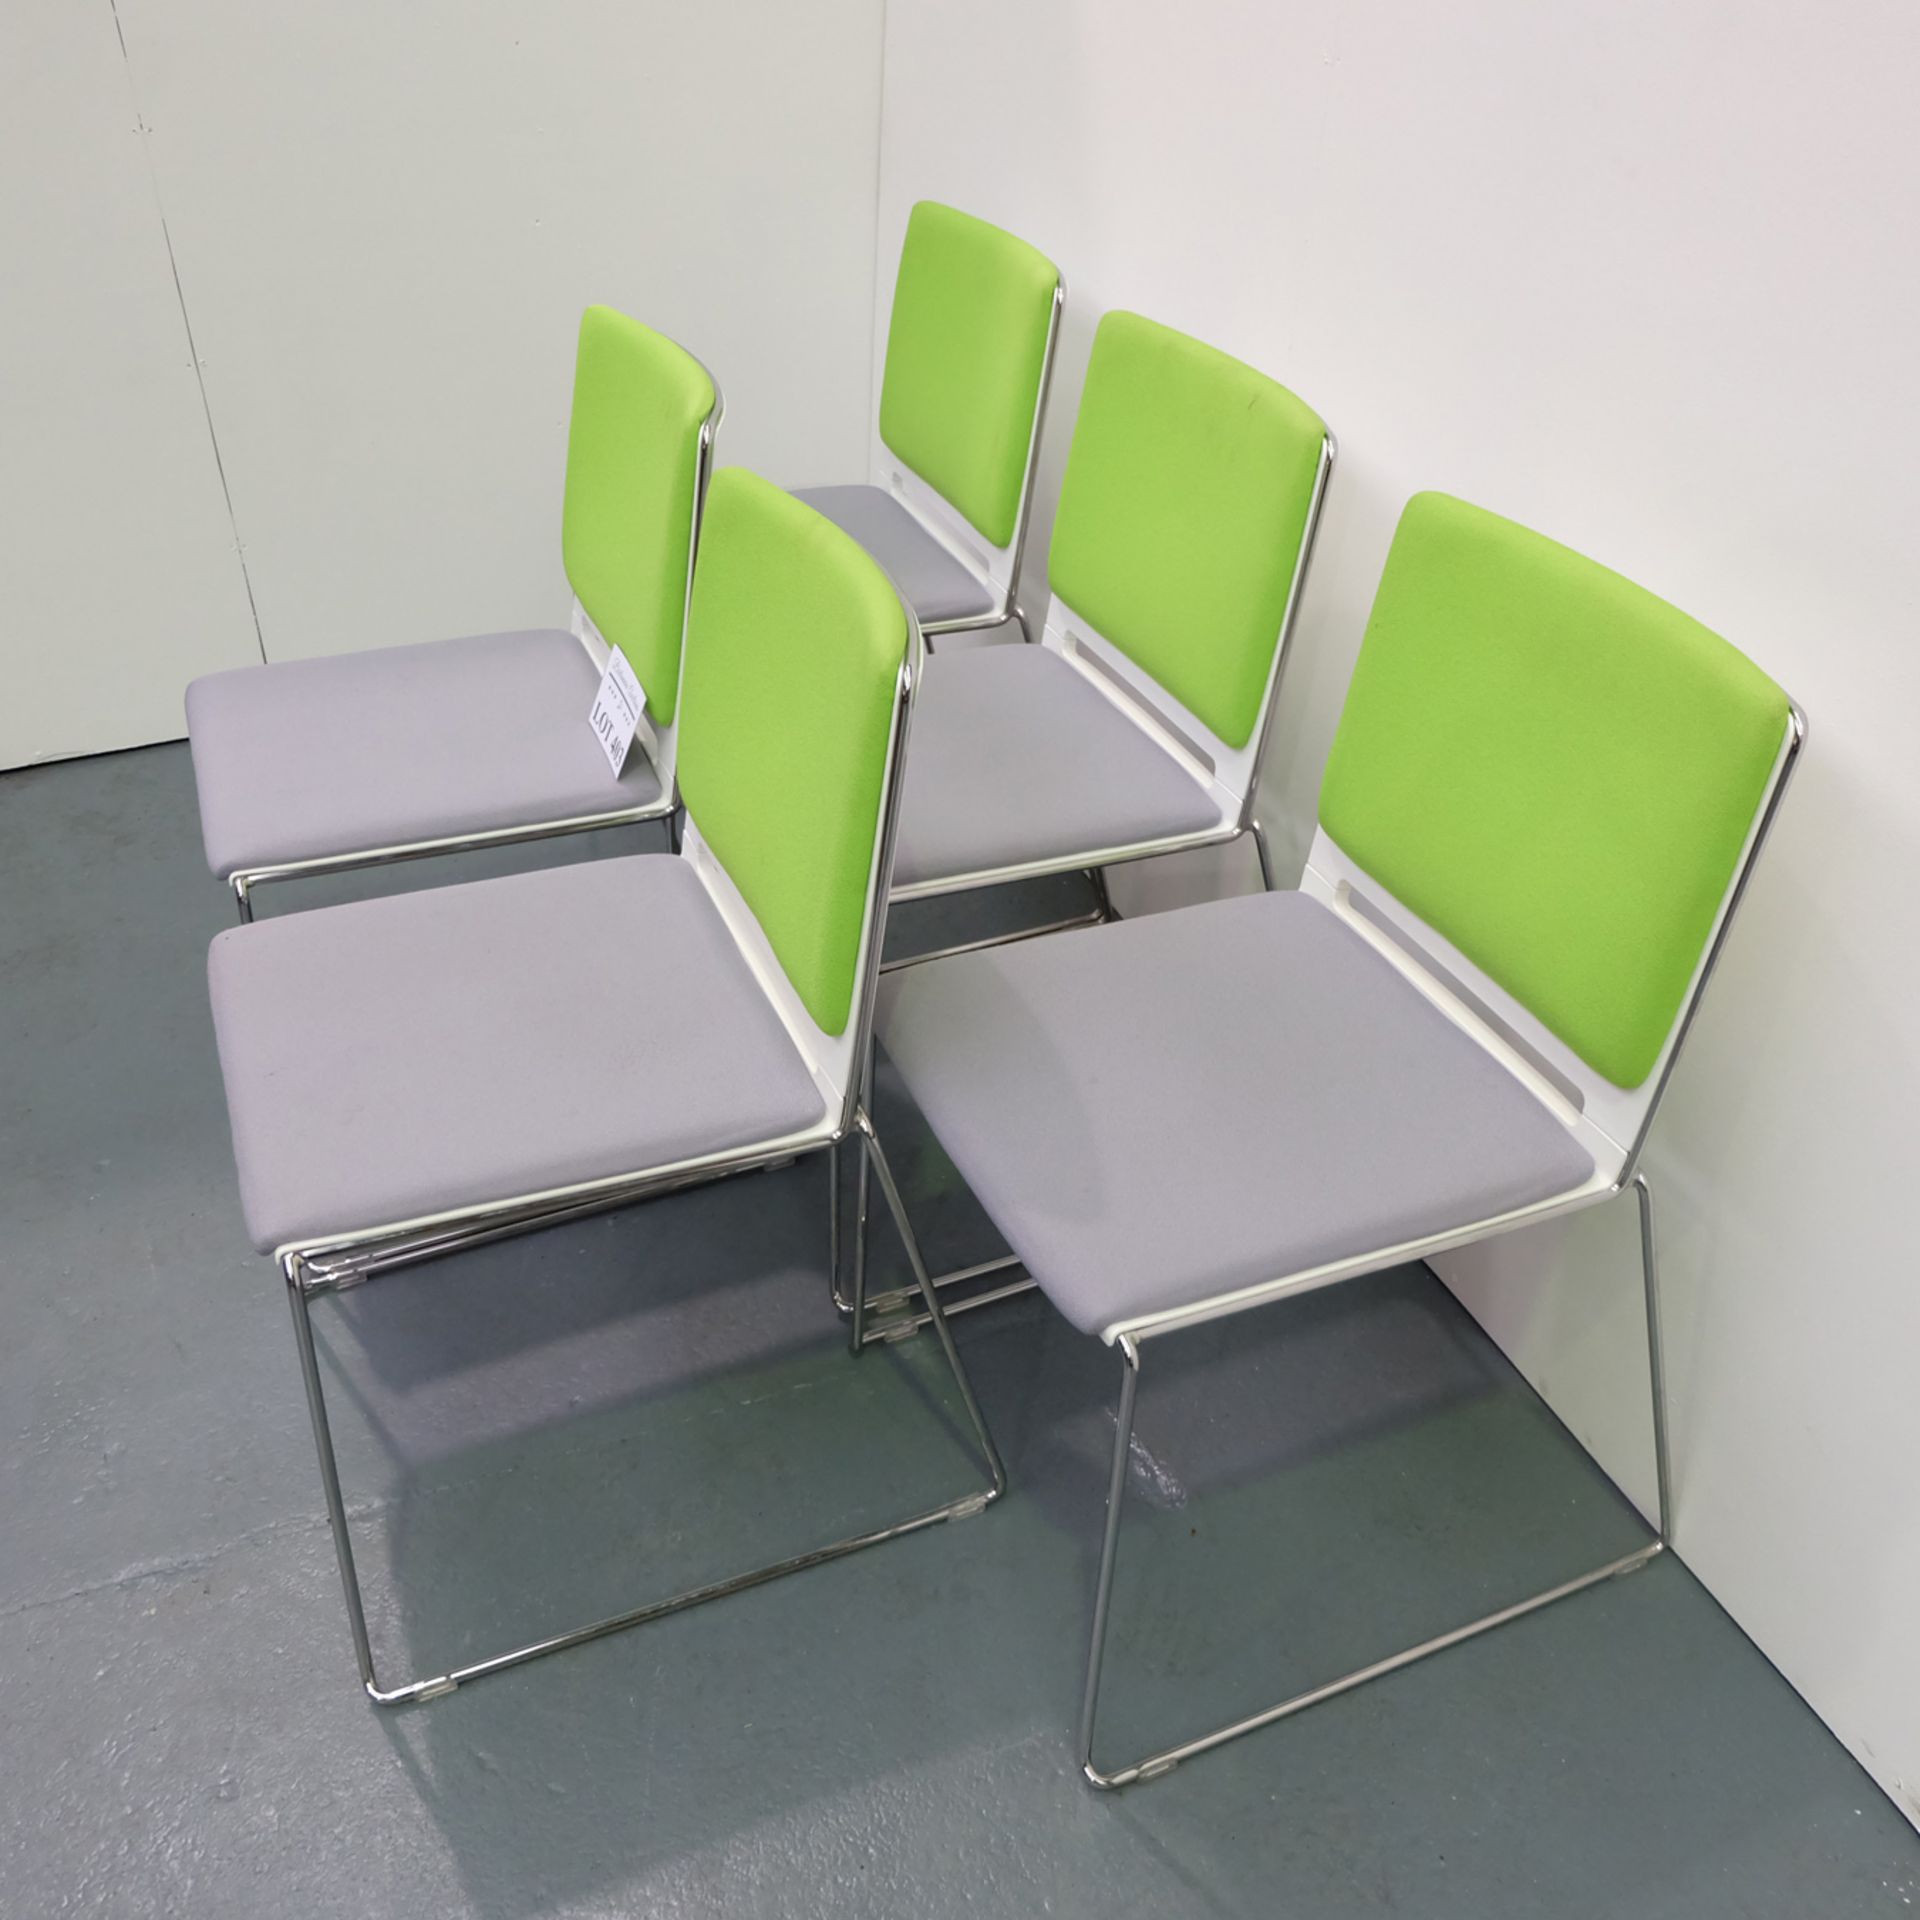 5 x Stackable Office Chairs. - Image 2 of 2